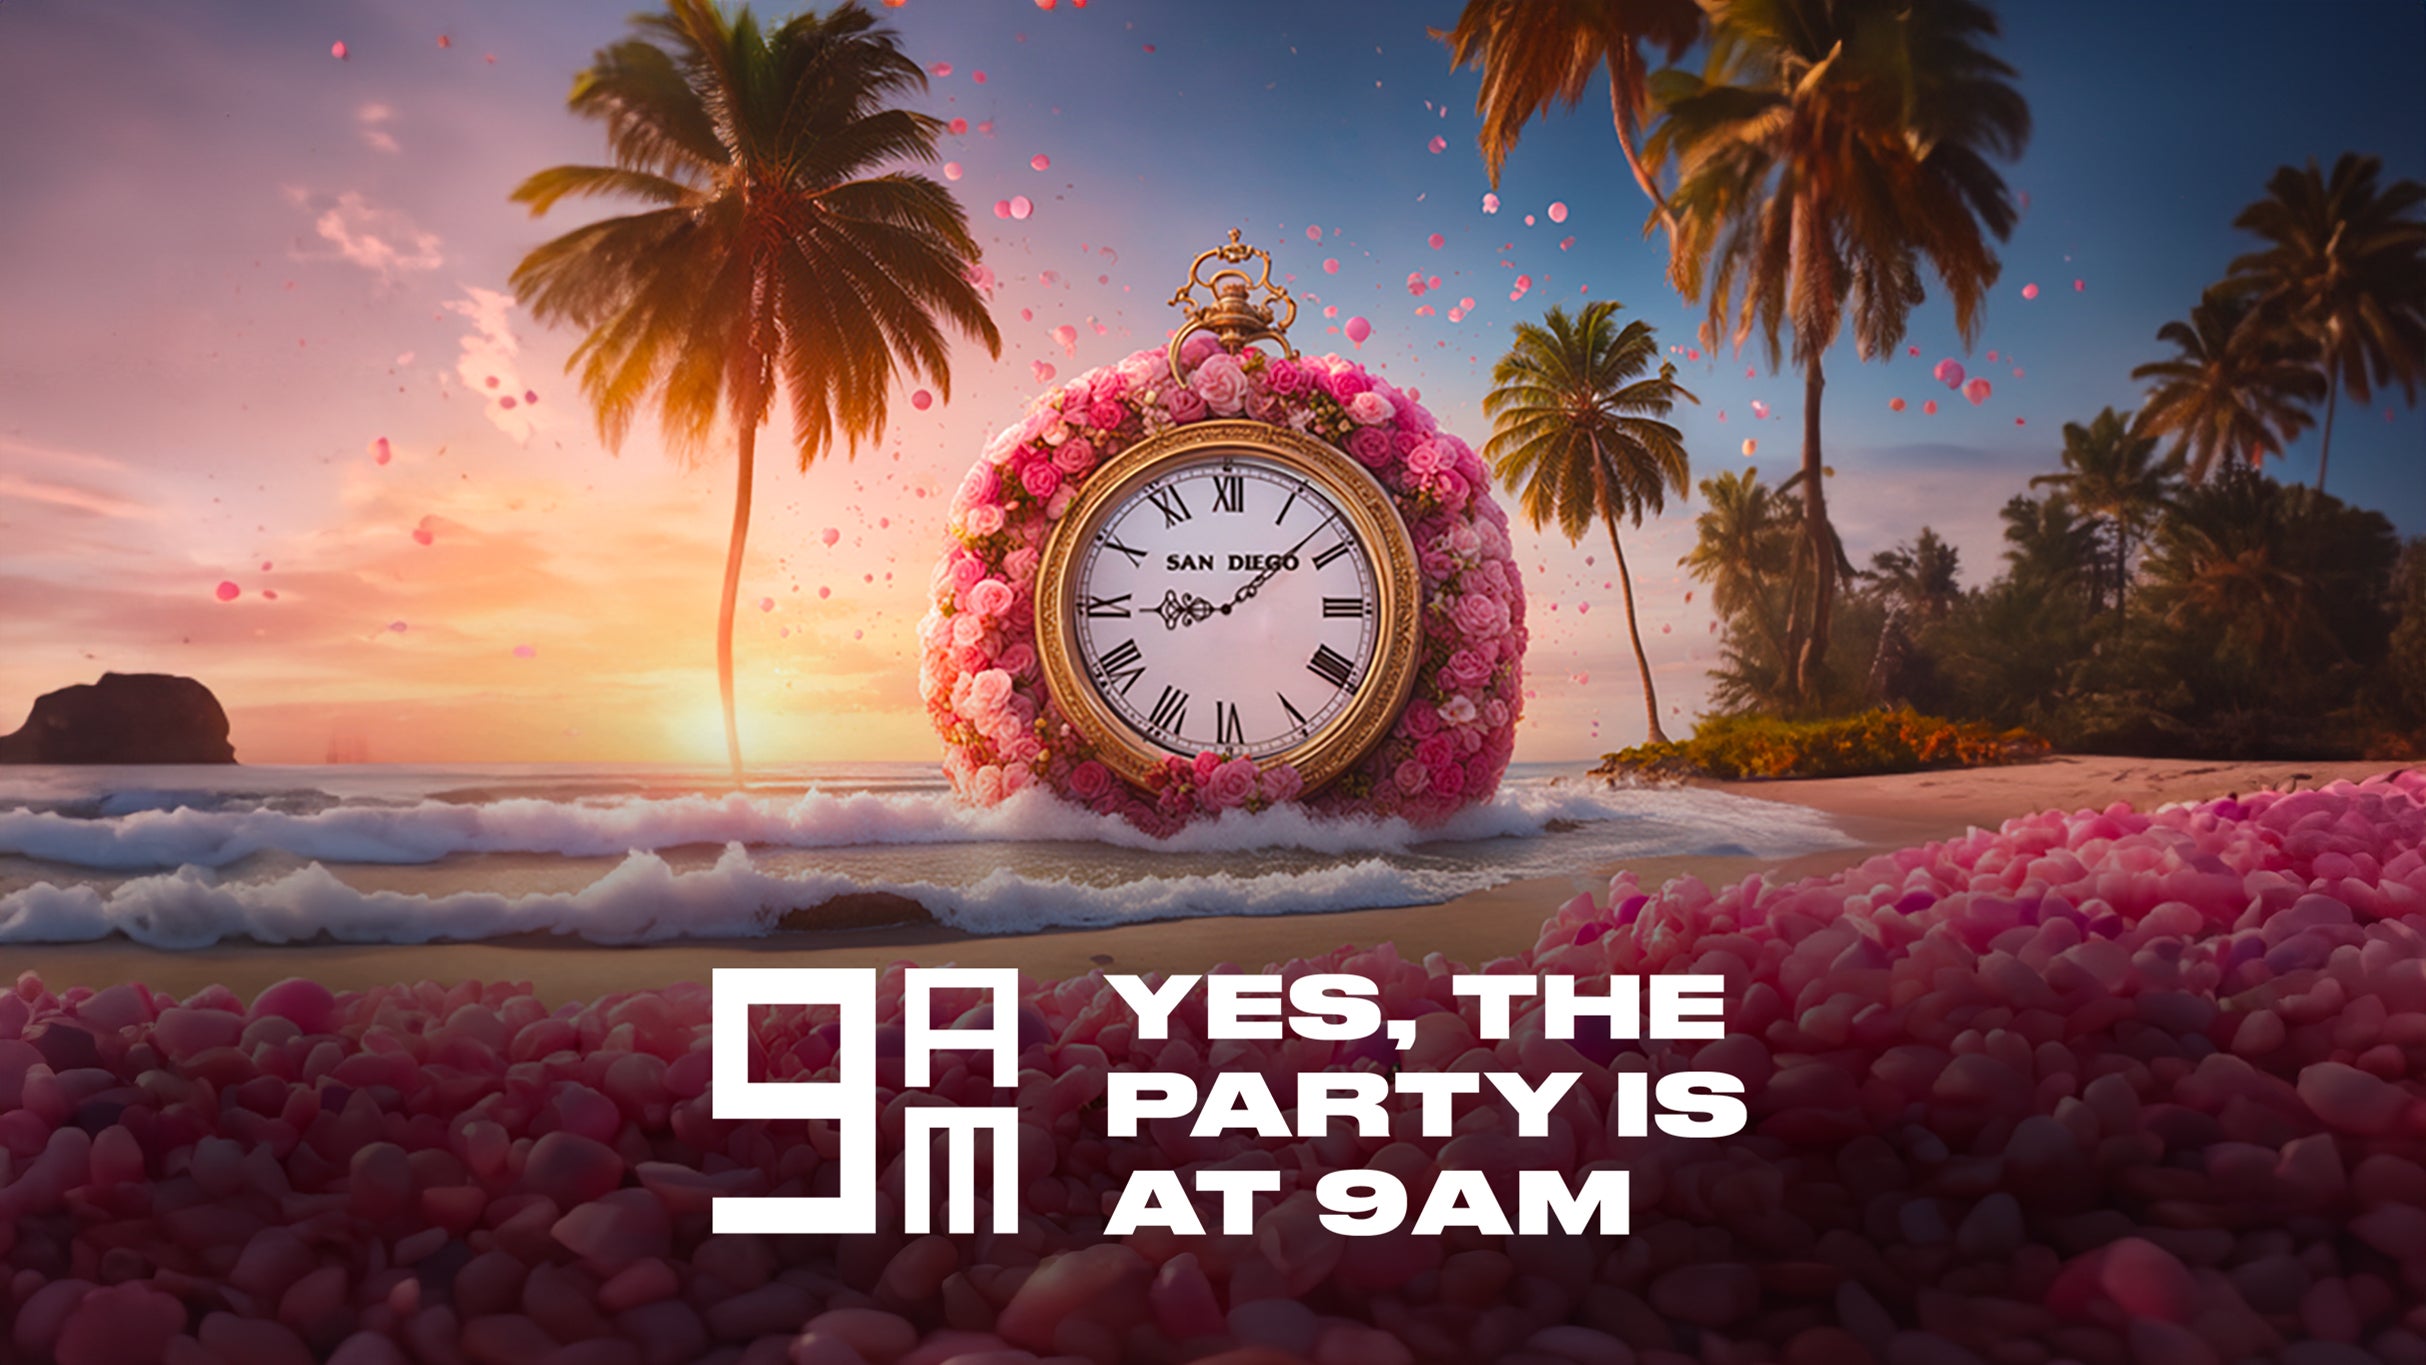 THE 9AM BANGER Presents: Rise and Rose'! Yes, The Party is at 9AM! 21+ in San Diego promo photo for Citi® Cardmember presale offer code